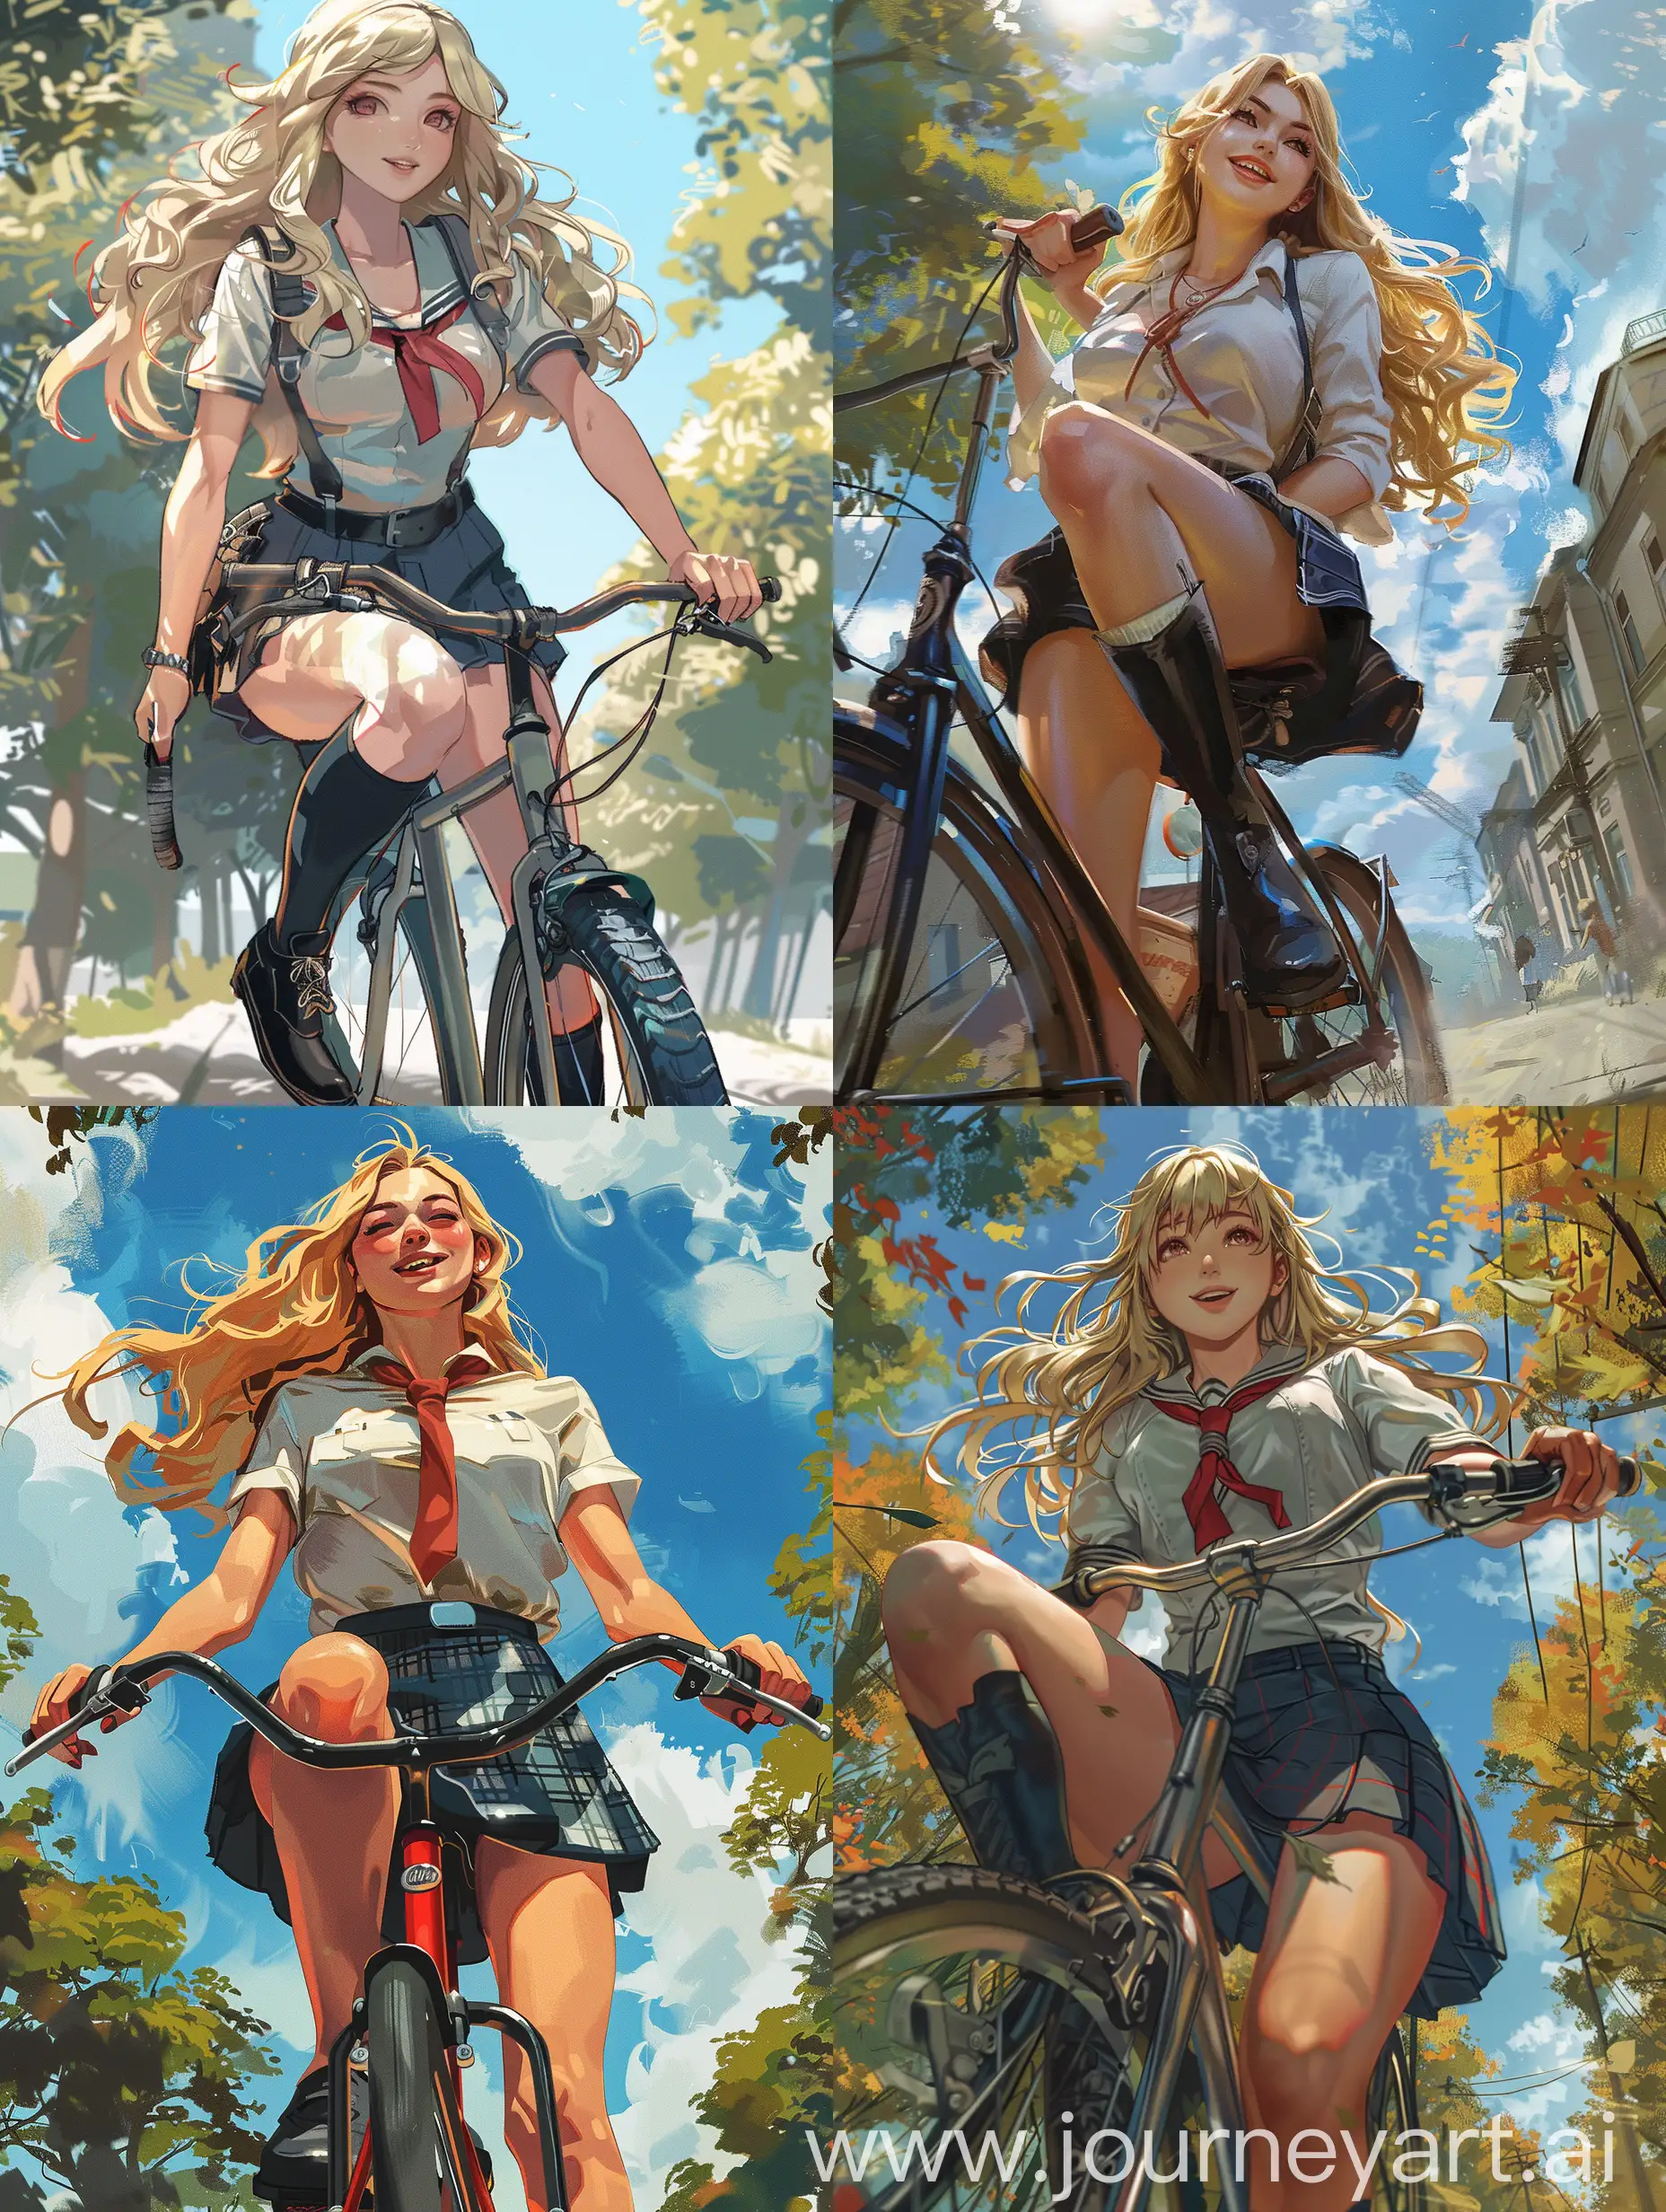 1 ukrain woman, no illustration,  , 22 years old, blonde hair, school uniform, down view, natural, , sunny day, ,  on bicycle, fat legs, no , front view, smiling , black boots